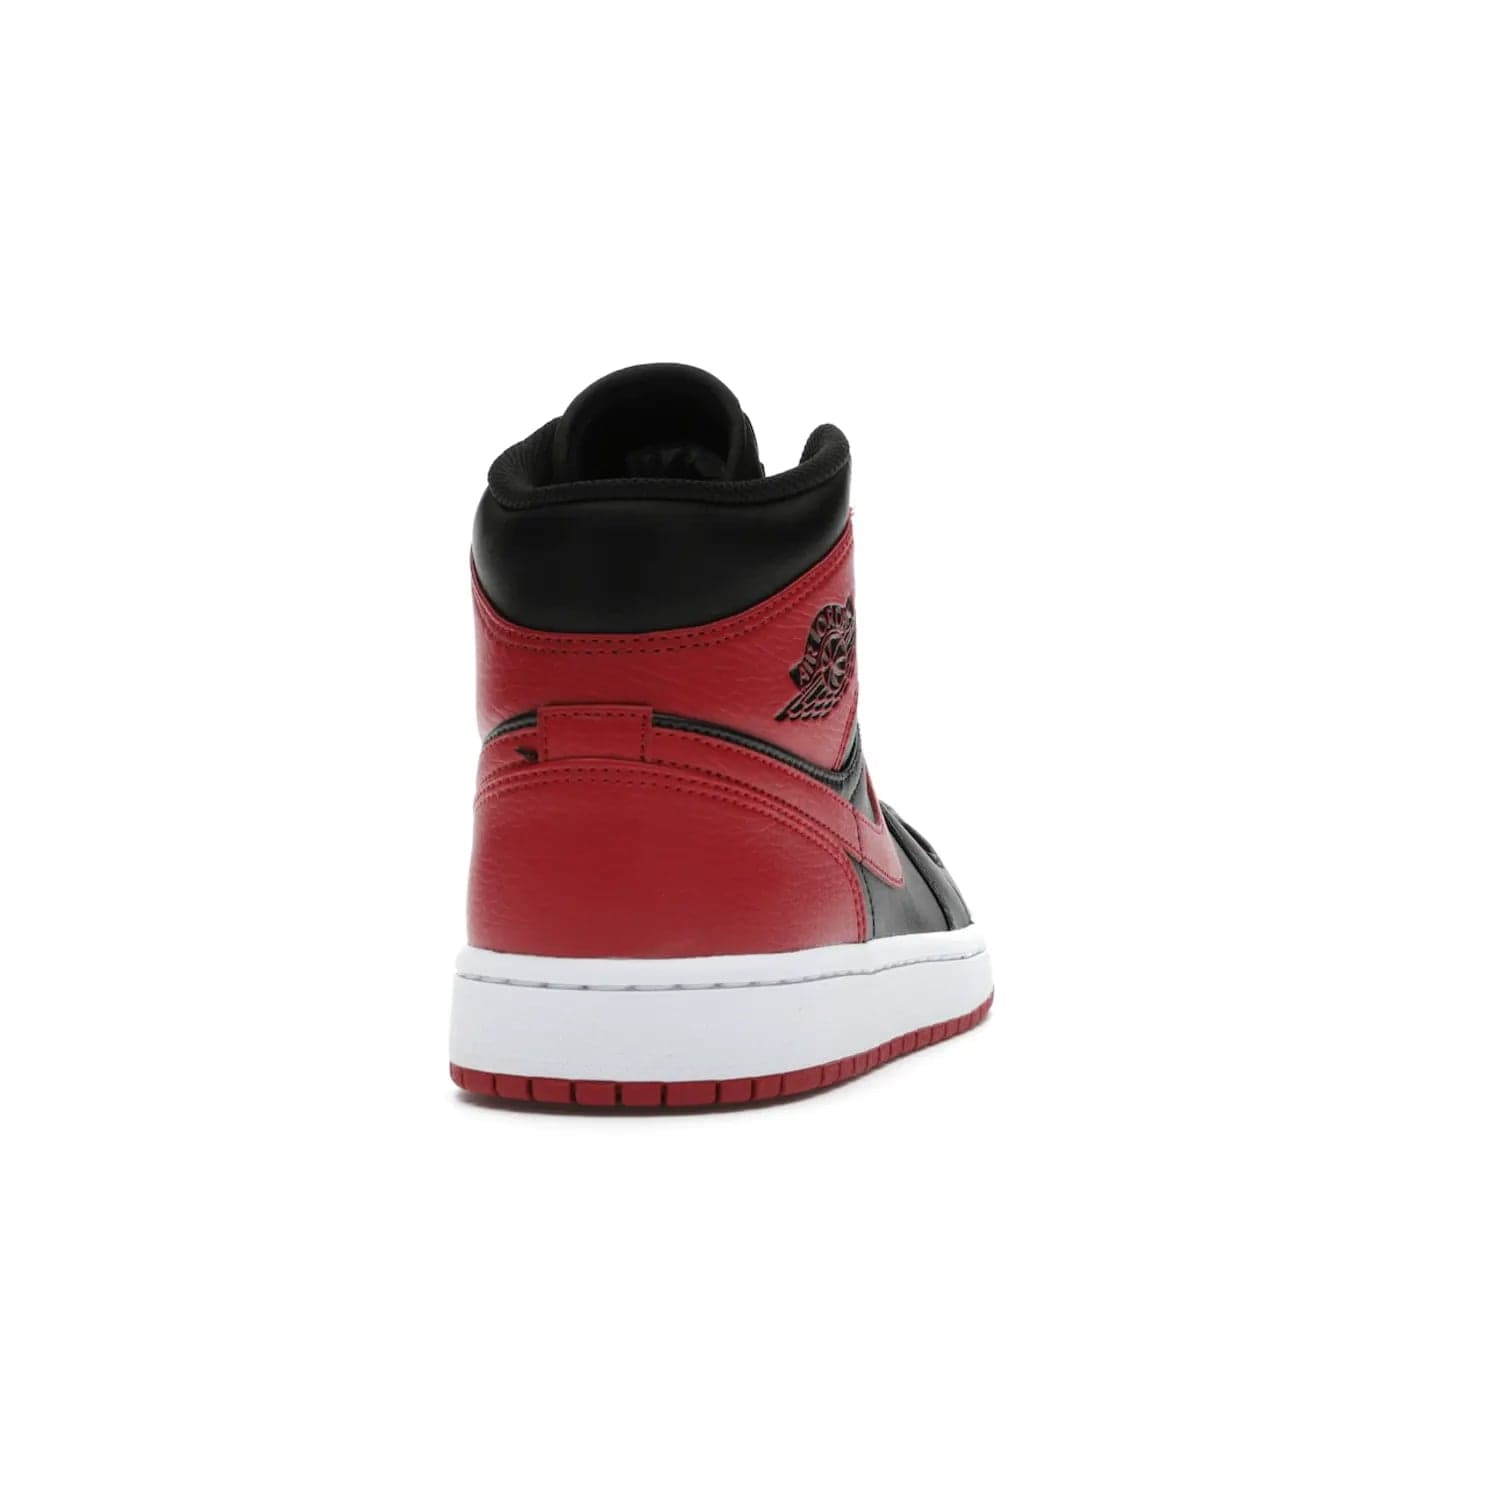 Jordan 1 Mid Banned (2020) - Image 29 - Only at www.BallersClubKickz.com - The Air Jordan 1 Mid Banned (2020) brings a modern twist to the classic Banned colorway. Features full-grain black and red leather uppers, red leather around the toe, collar, heel, & Swoosh. Release November 2021 for $110.